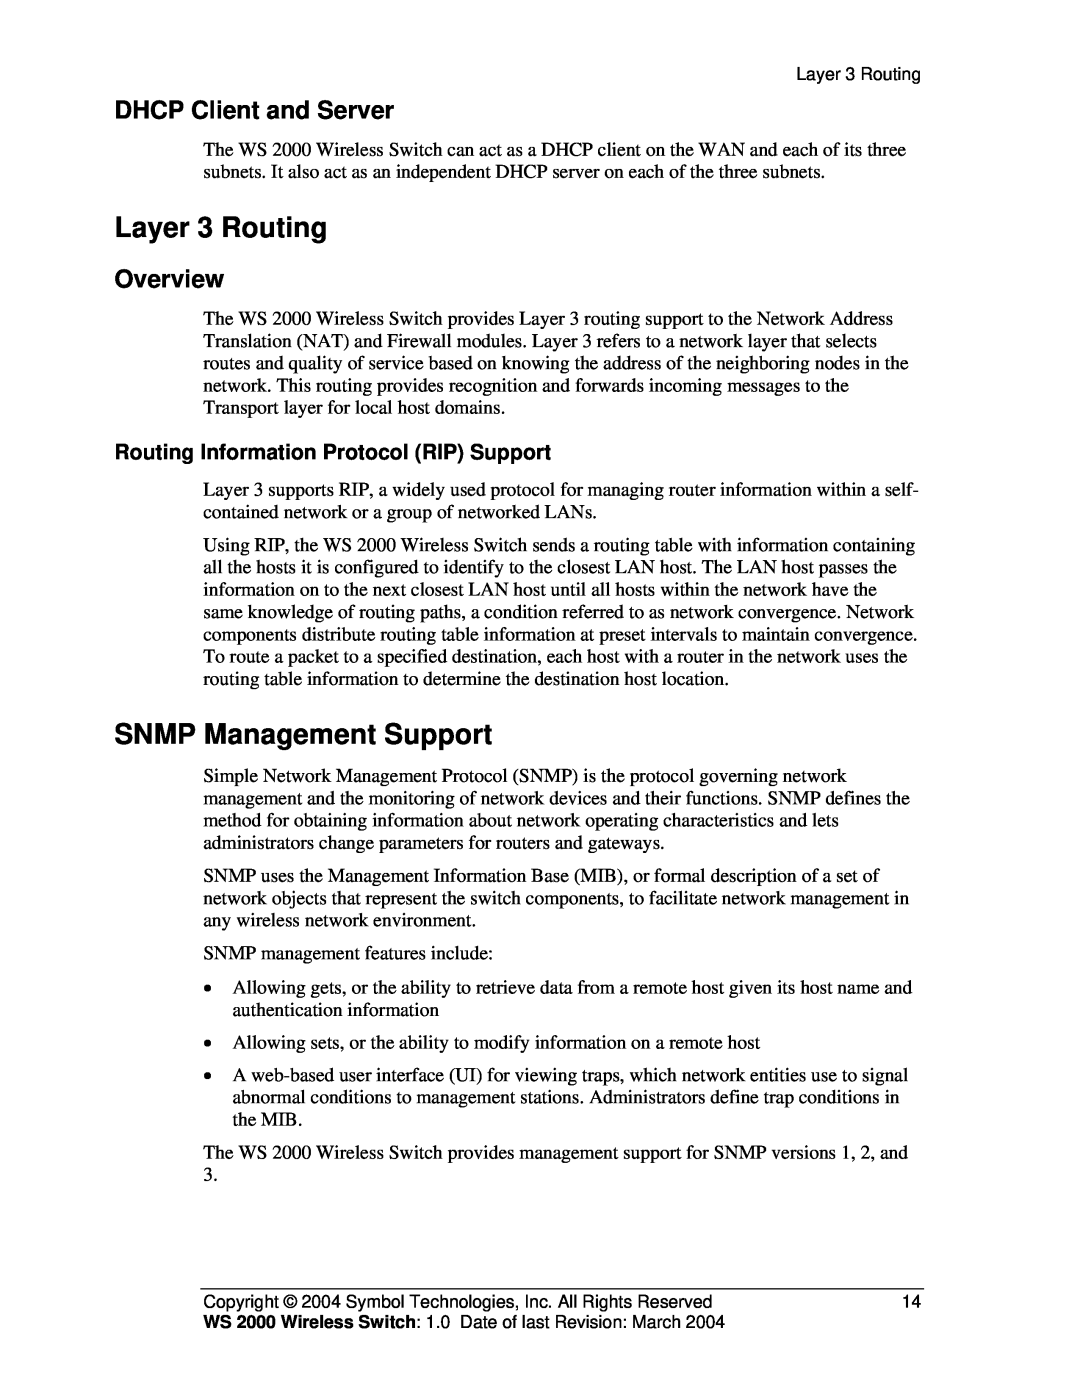 Symbol Technologies WS 2000 manual Layer 3 Routing, SNMP Management Support, DHCP Client and Server, Overview 